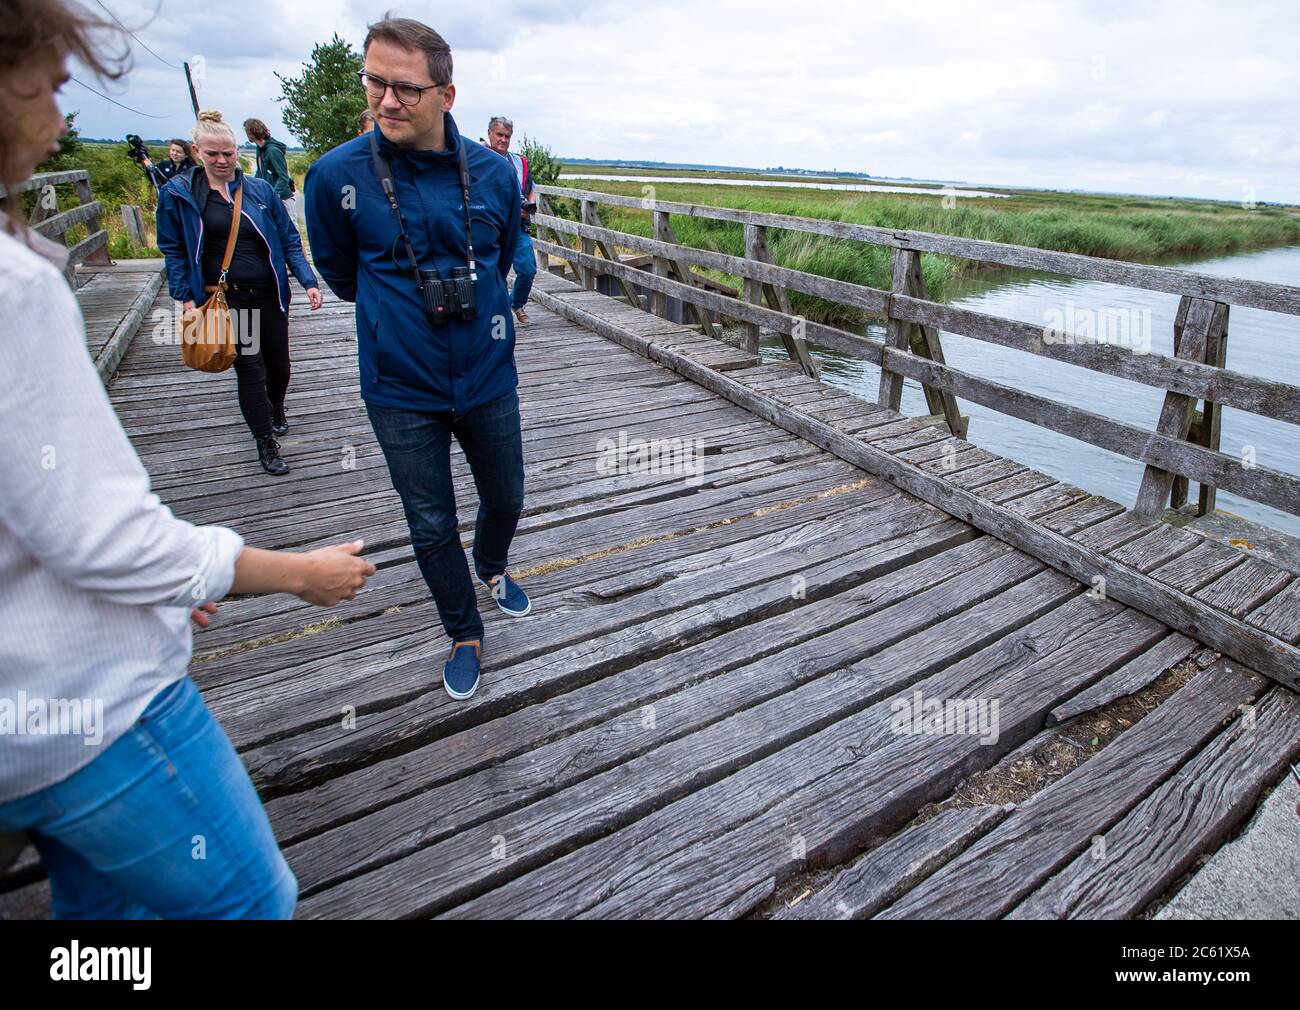 02 July 2020, Mecklenburg-Western Pomerania, Greifswald: Patrick Dahlemann (SPD), the Parliamentary State Secretary for Western Pomerania, crosses a rather dilapidated wooden bridge as access to the nature conservation island Koos in the Greifswald Bodden. After the renaturation, animal and plant species that were thought to be lost have returned to the island in recent years. The Succow Foundation was established in 1999 as the first non-profit nature conservation foundation in the new federal states of Germany. In 2016 it took over 365 hectares on the island and in the Karrendorf meadows on Stock Photo